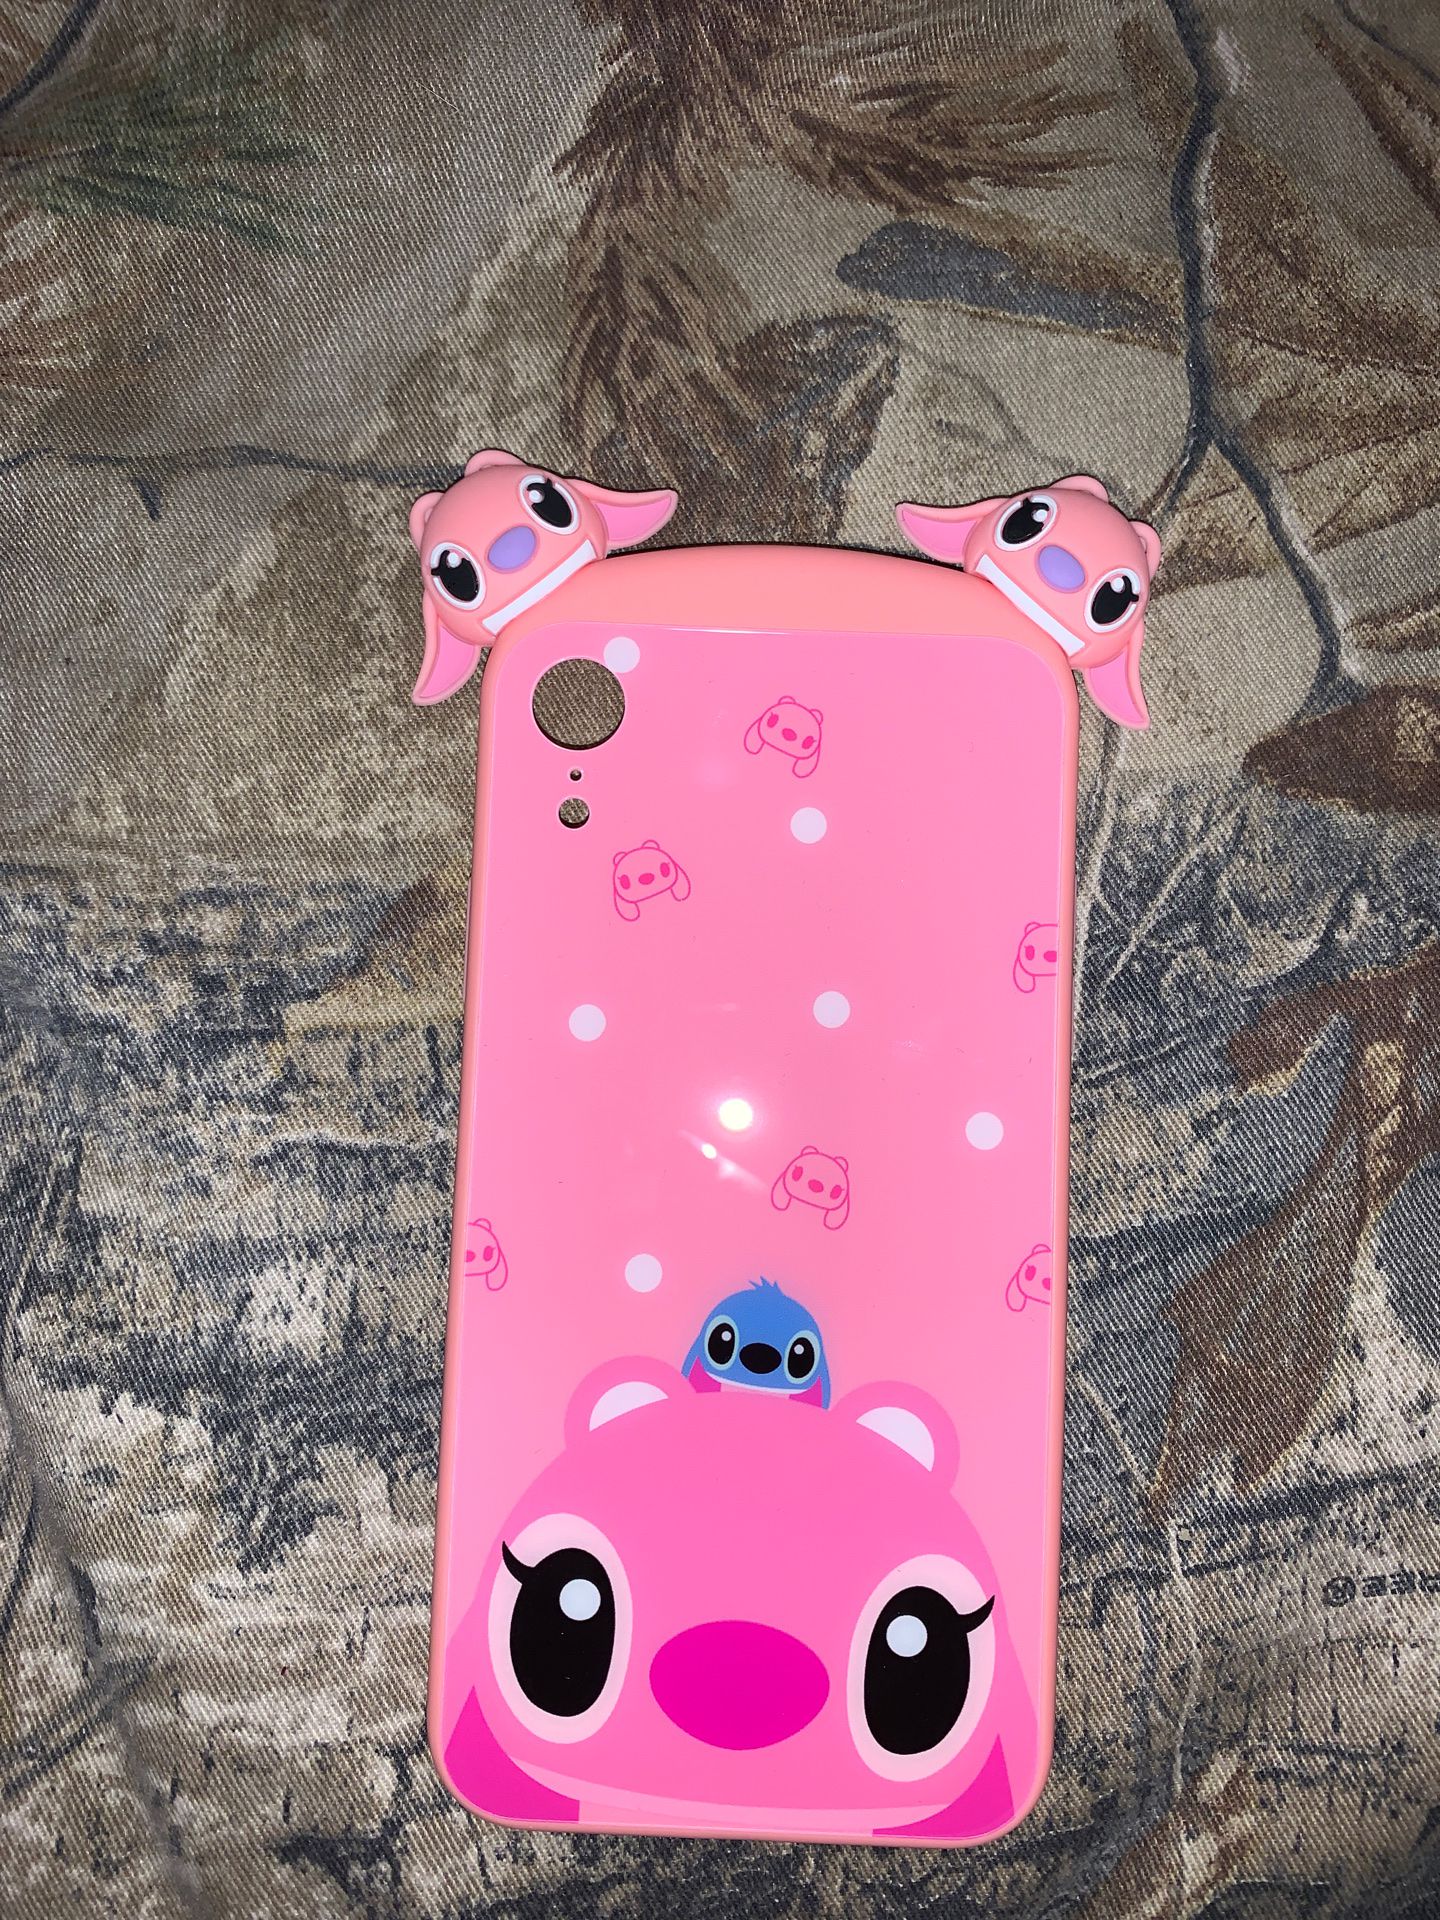 Angel and stitch iPhone XR case